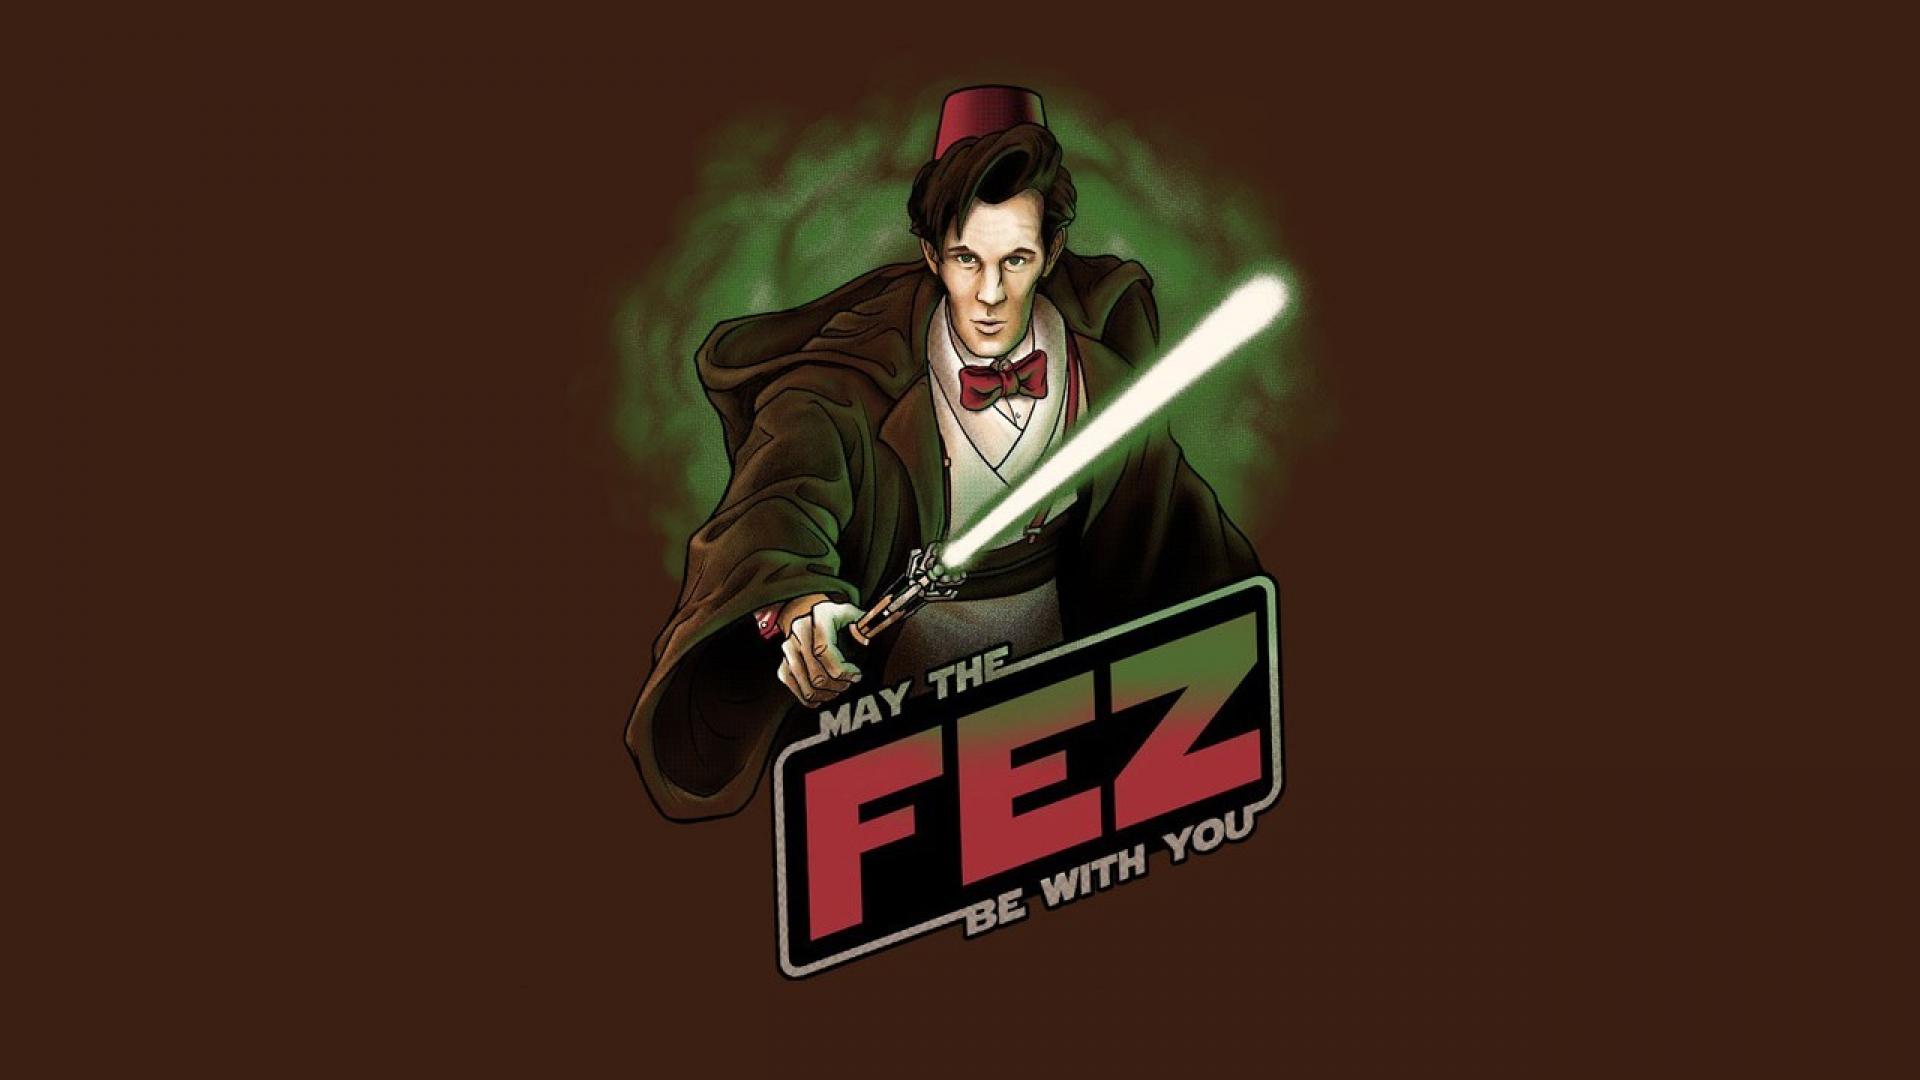 Star wars may eleventh doctor who fez wallpaper  (39755)